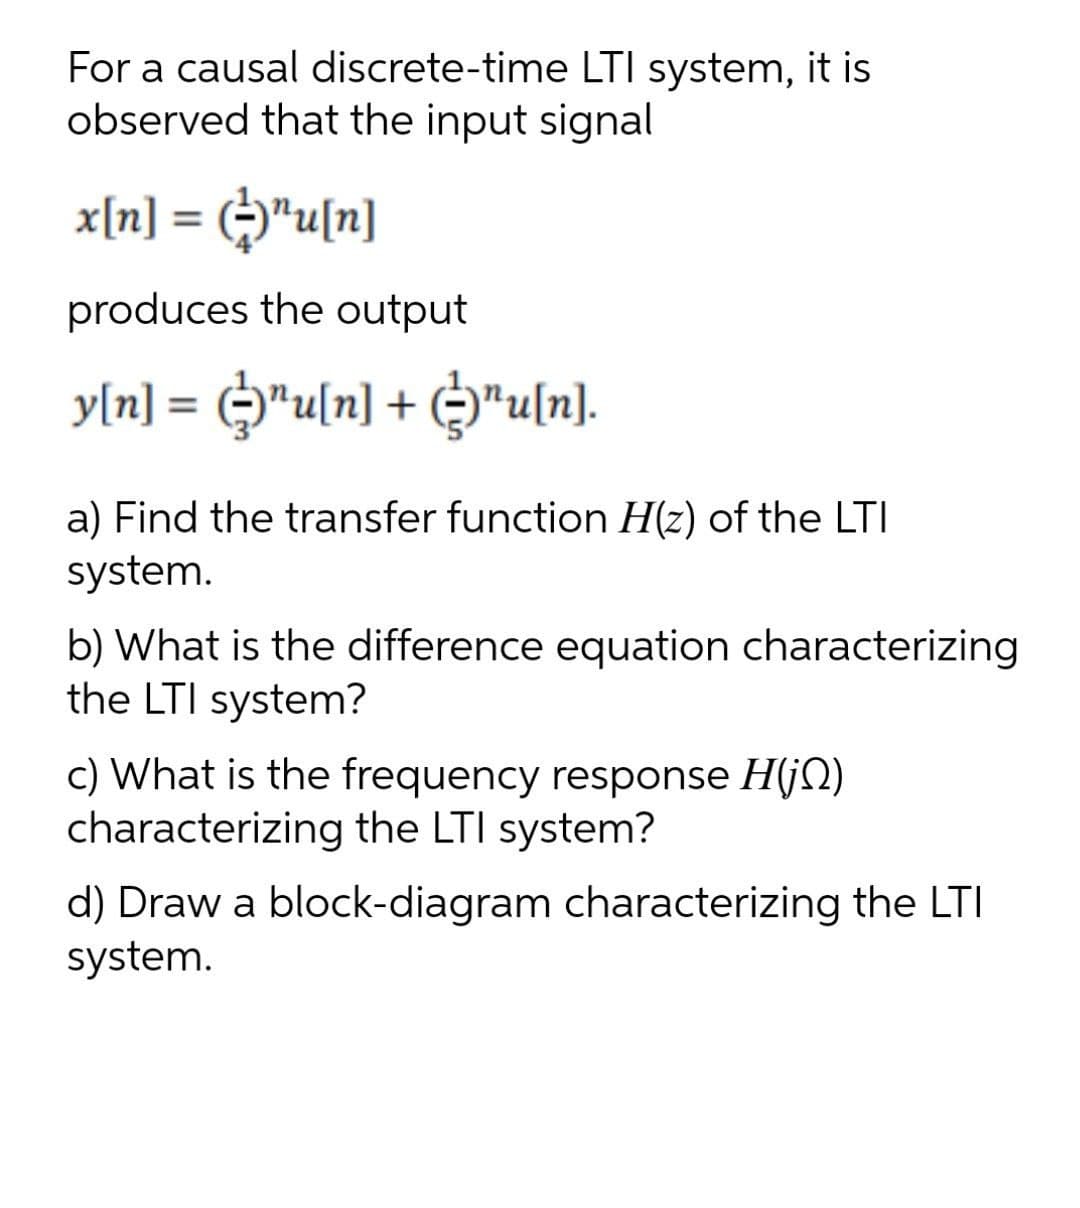 For a causal discrete-time LTI system, it is
observed that the input signal
x[n] = ("u[n]
produces the output
y[n] = G*u[n] + ©"u[n].
%3D
a) Find the transfer function H(z) of the LTI
system.
b) What is the difference equation characterizing
the LTI system?
c) What is the frequency response H(jN)
characterizing the LTI system?
d) Draw a block-diagram characterizing the LTI
system.
